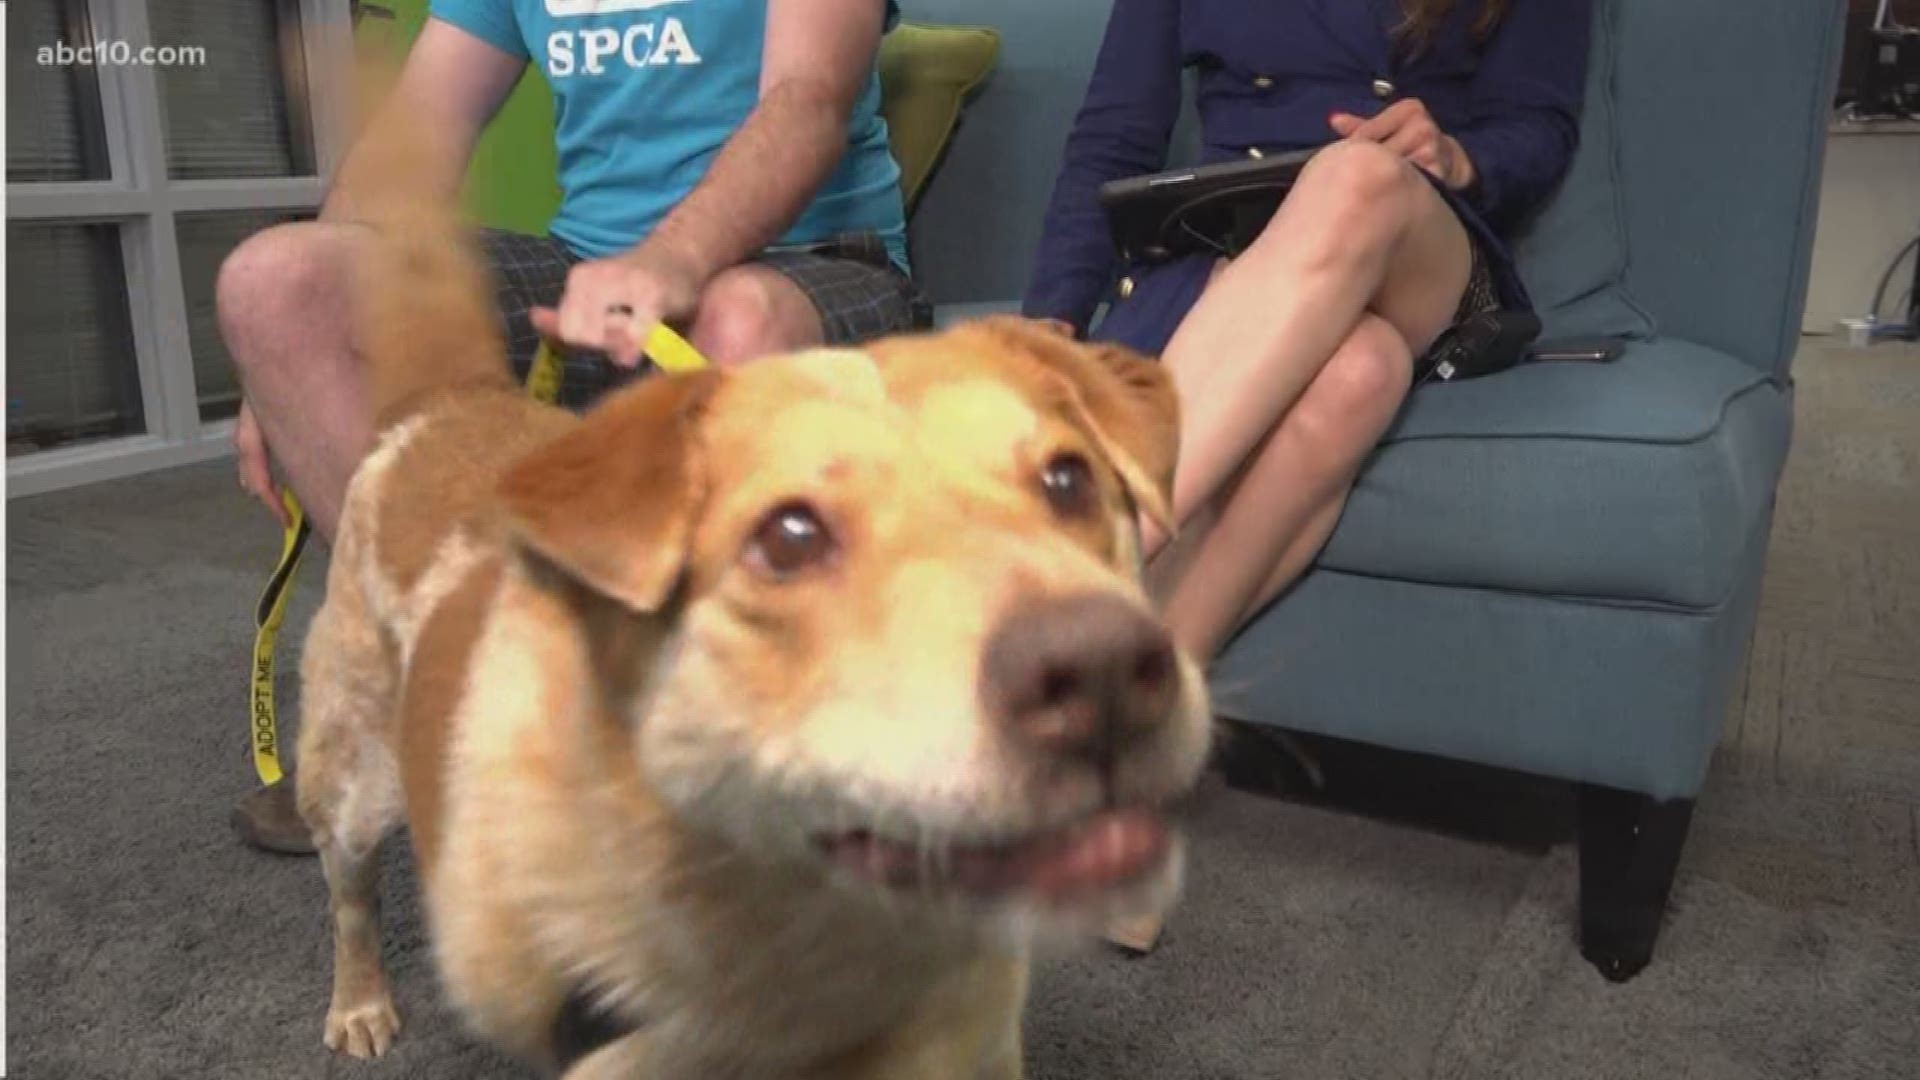 This week's Sacramento SPCA Pet of the Week is PJ! This 10-year-old Australian Cattle Dog mix has tons of energy and is incredibly loving. Get in touch with the Sac SPCA here: https://www.sspca.org/dogs